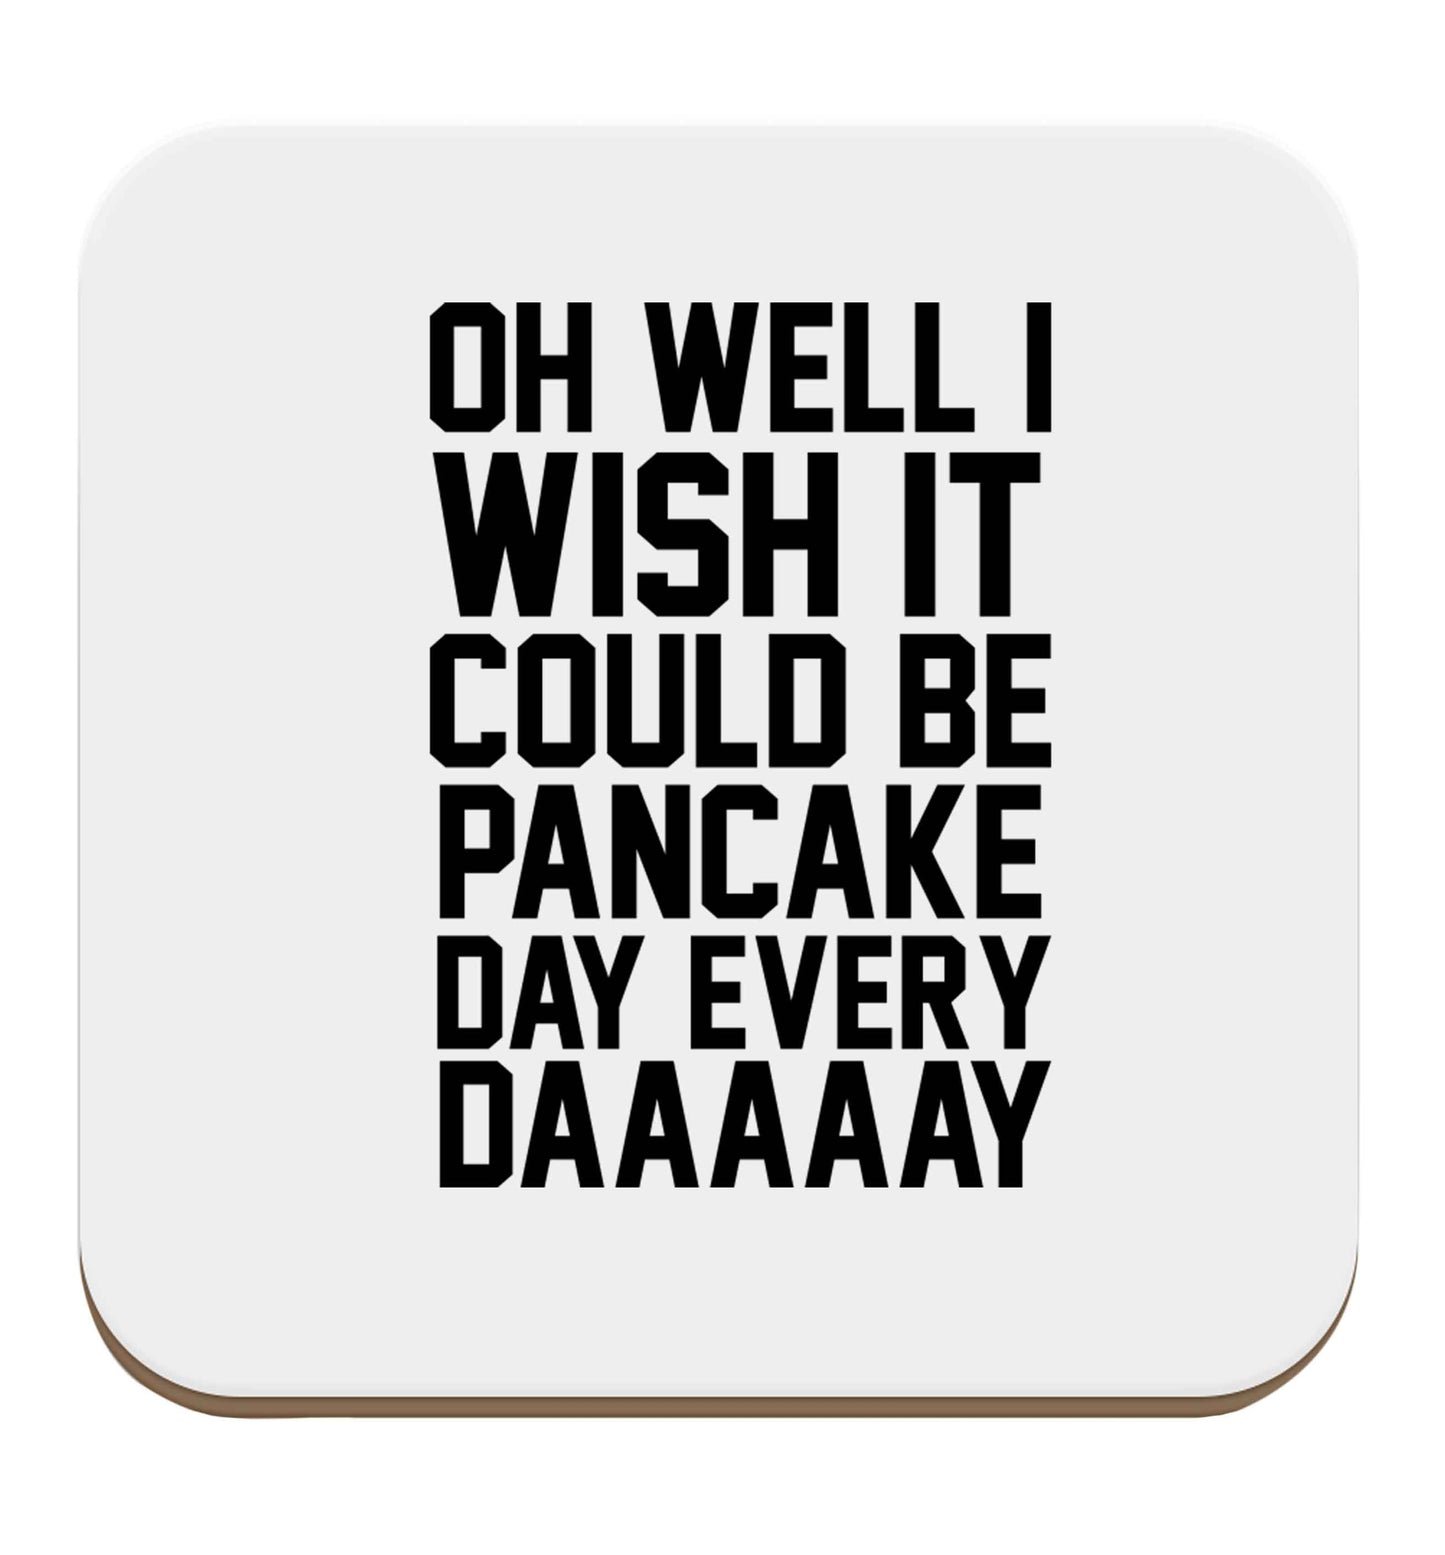 Oh well I wish it could be pancake day every day set of four coasters